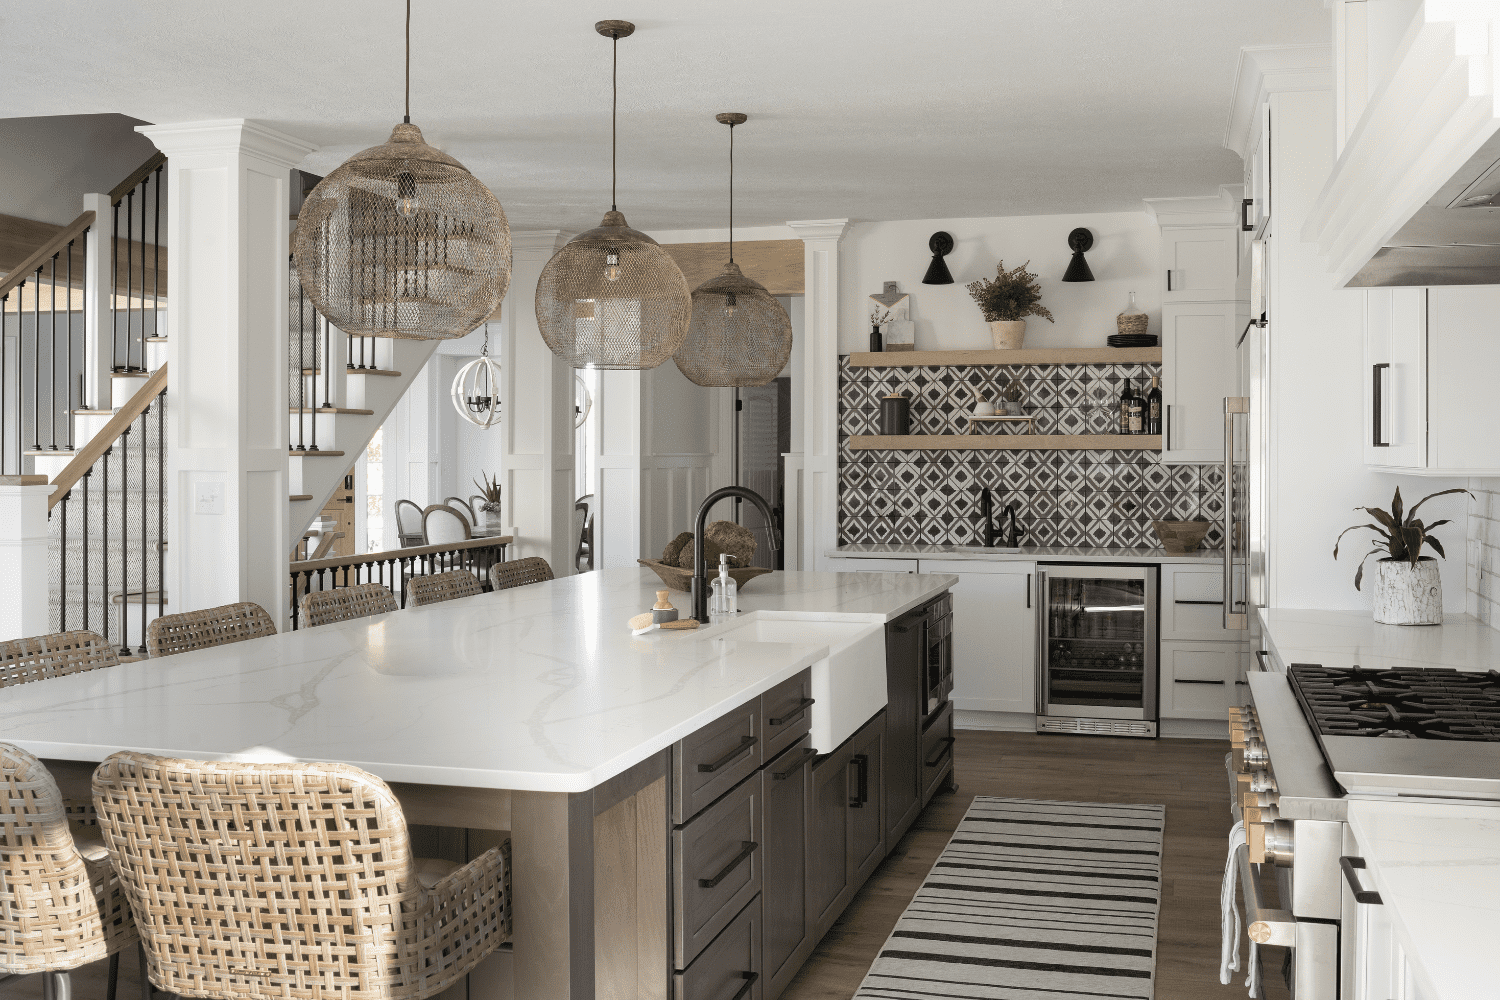 Nicholas Design Build | A kitchen with a white island and wicker chairs.